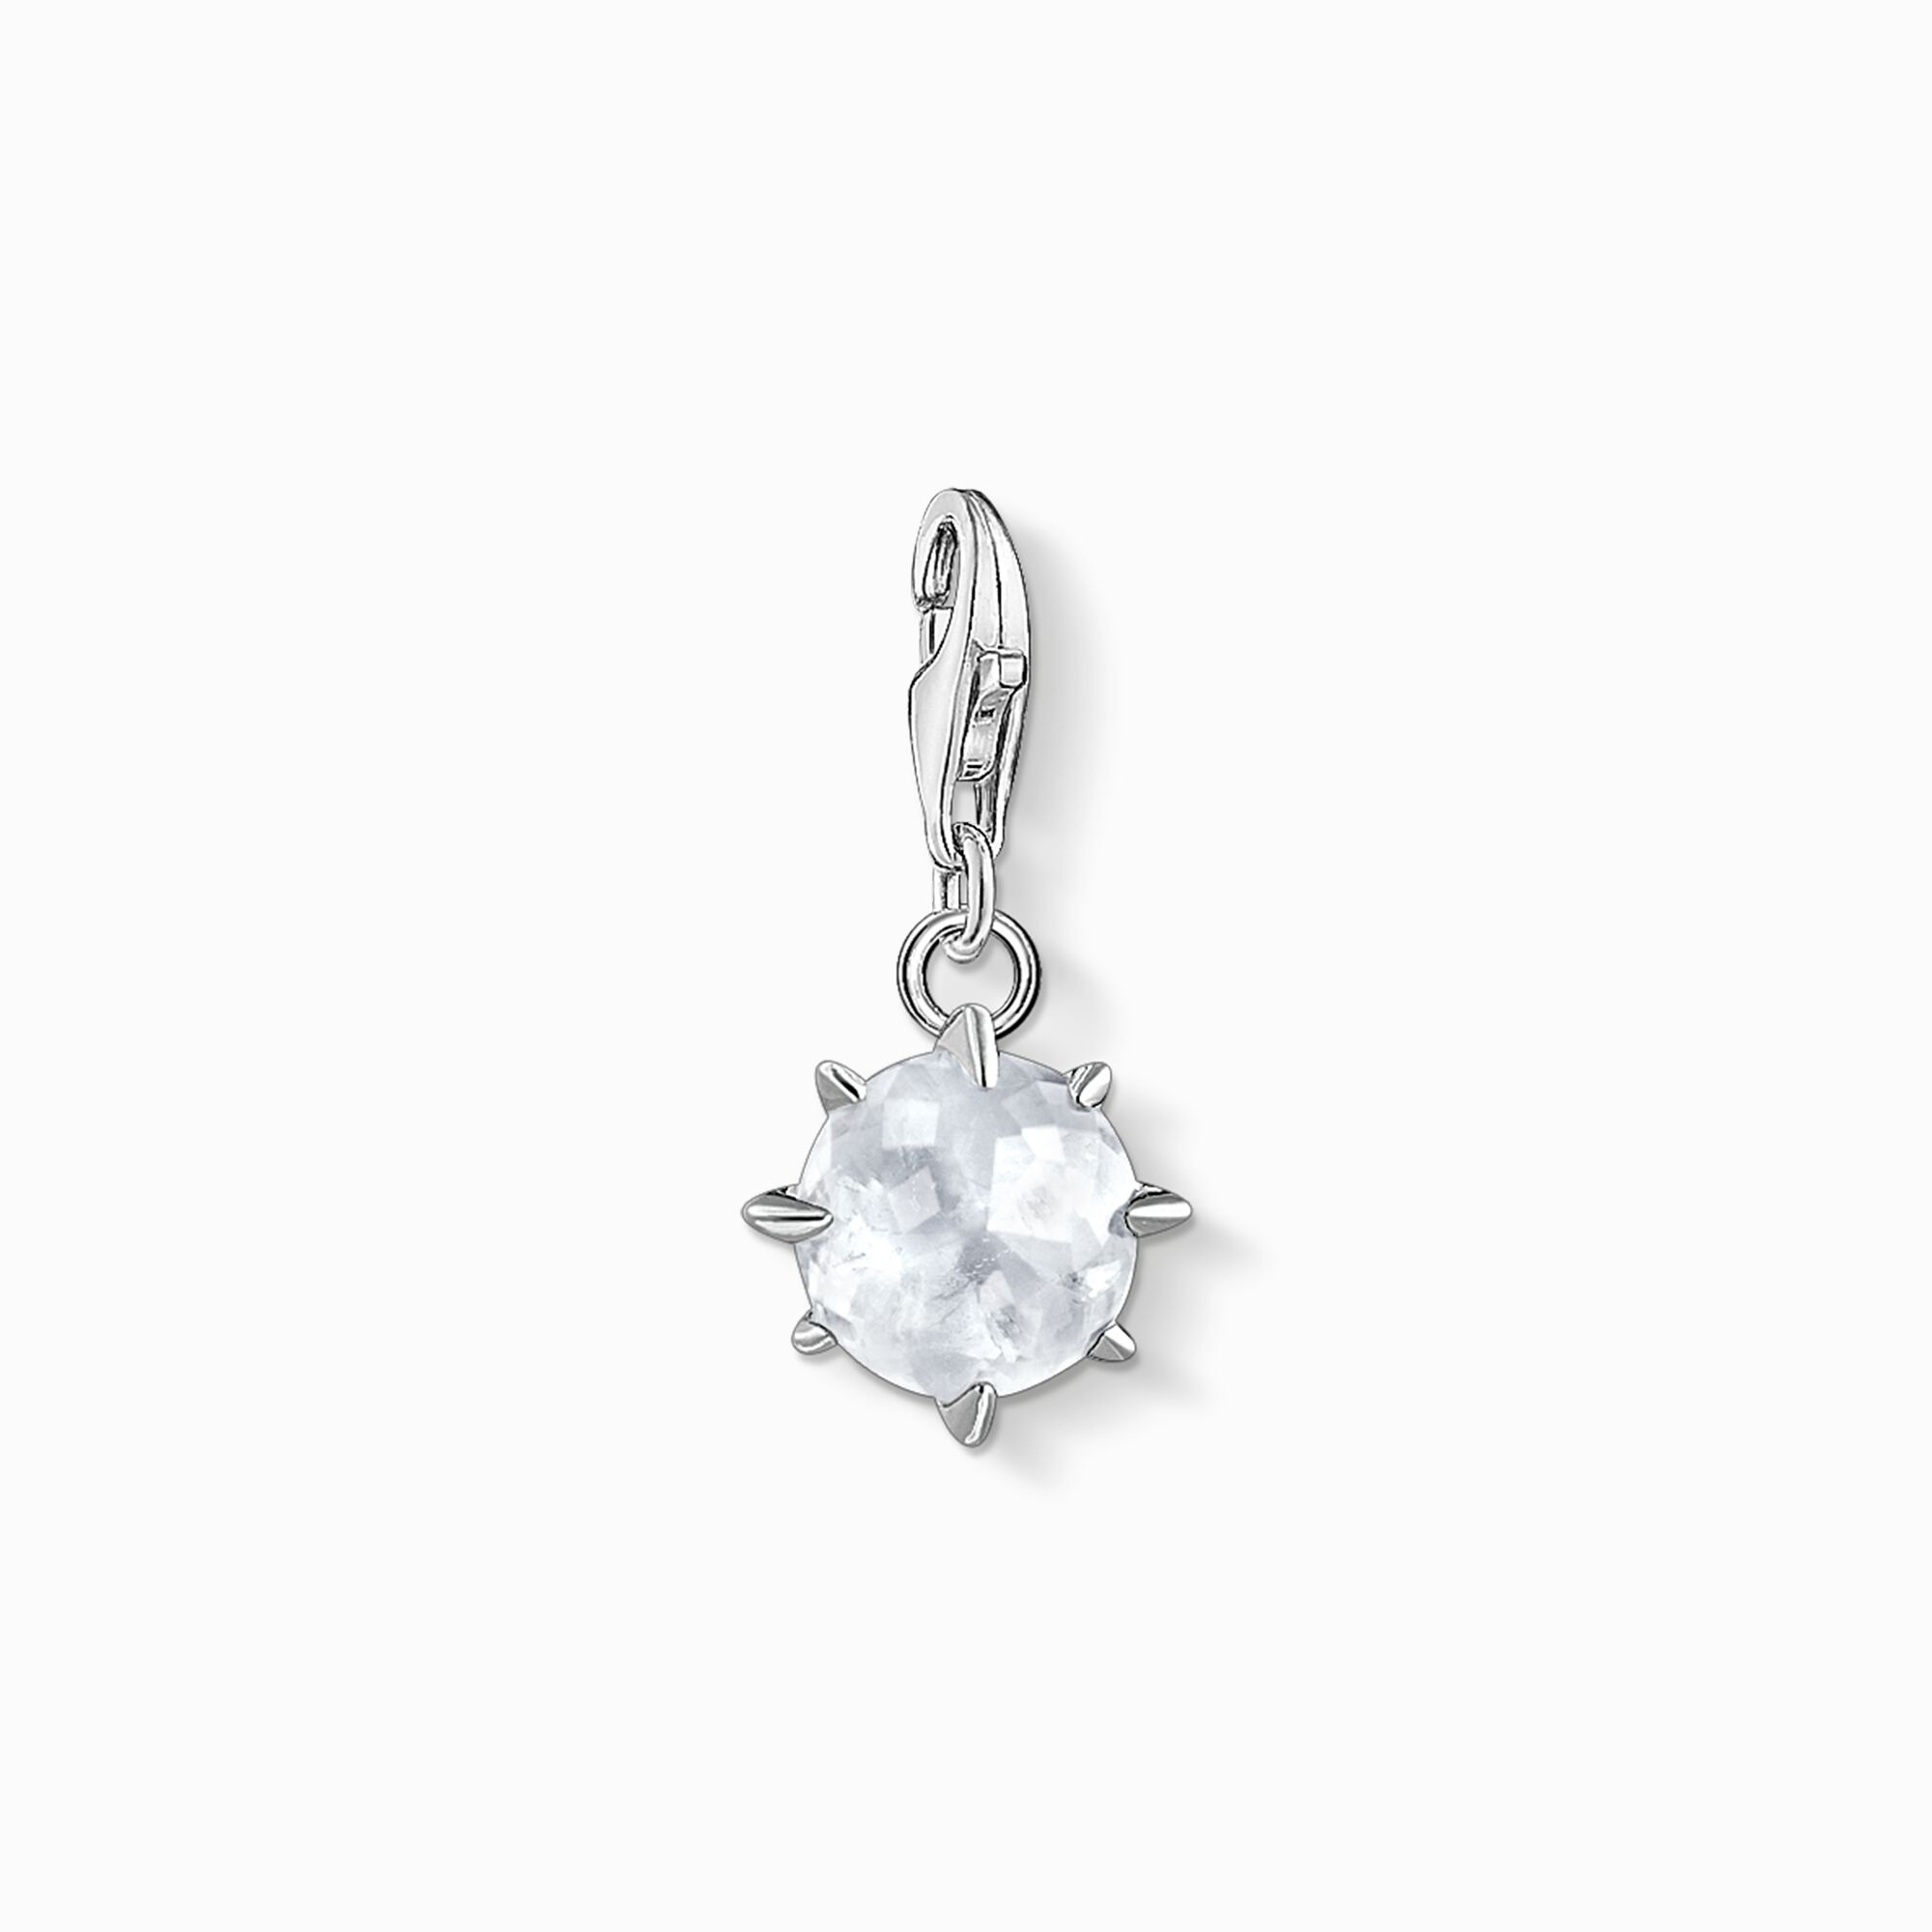 Charm pendant birth stone April from the Charm Club collection in the THOMAS SABO online store